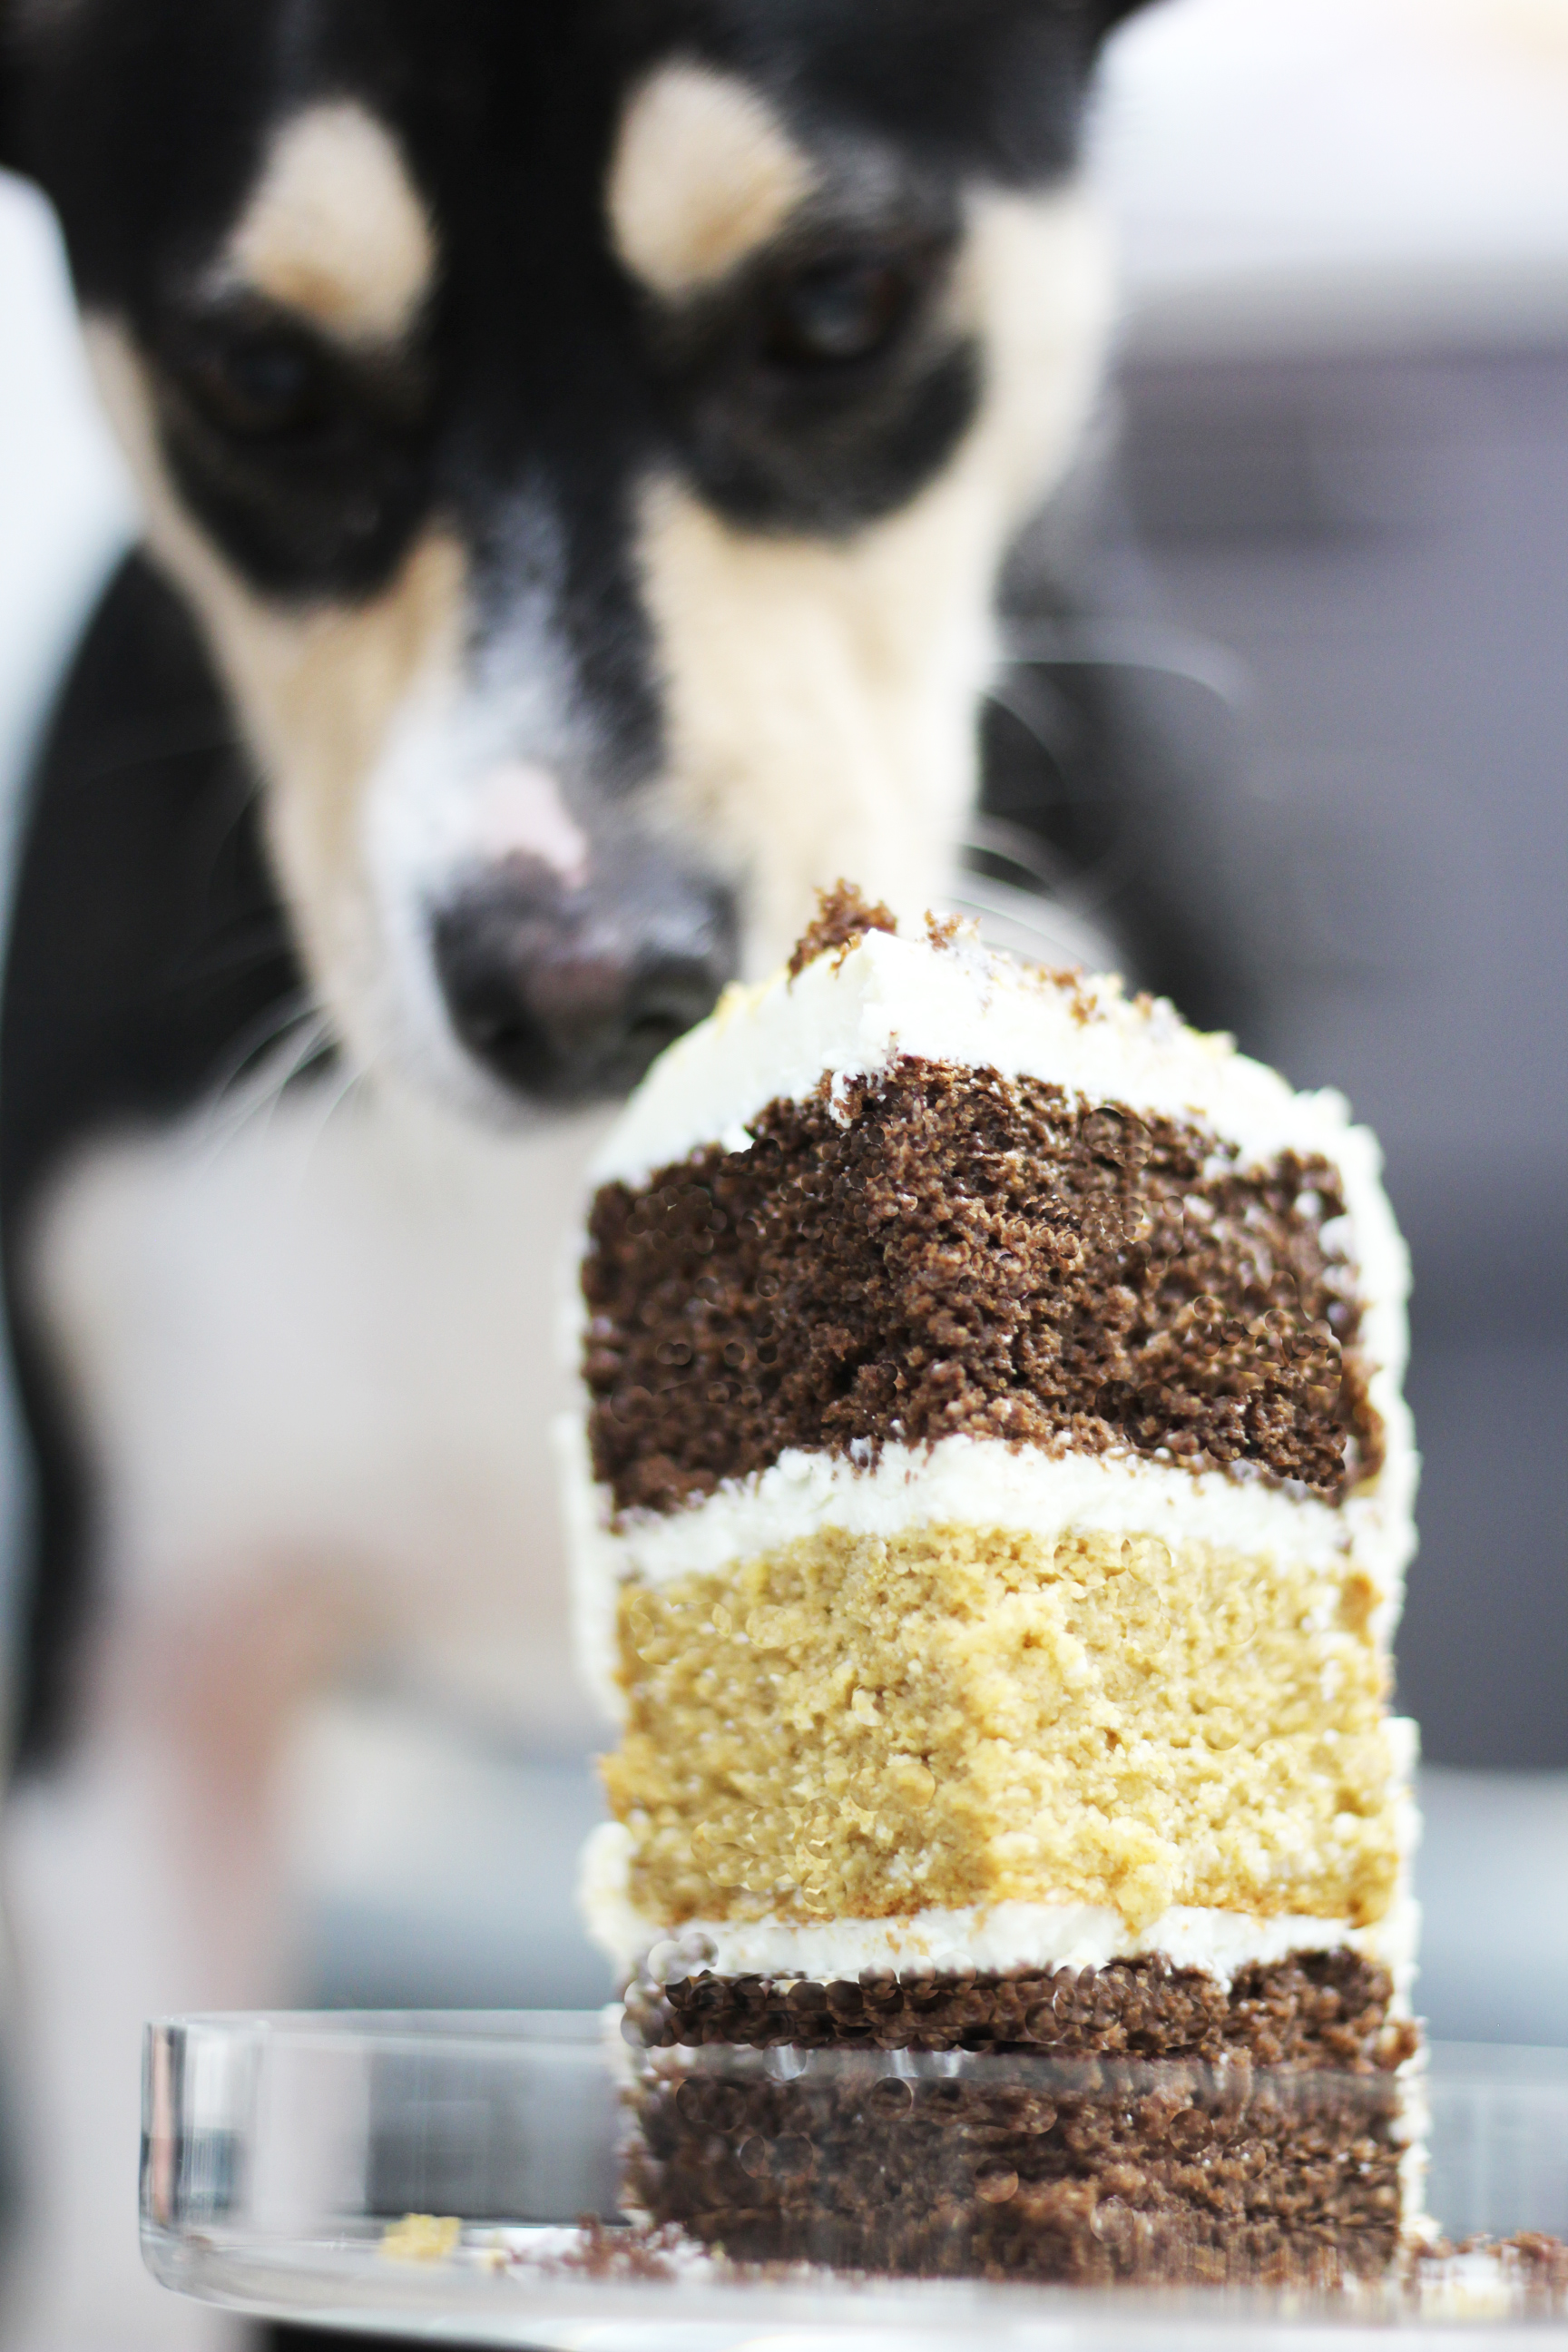 How To Make Puppy Cake